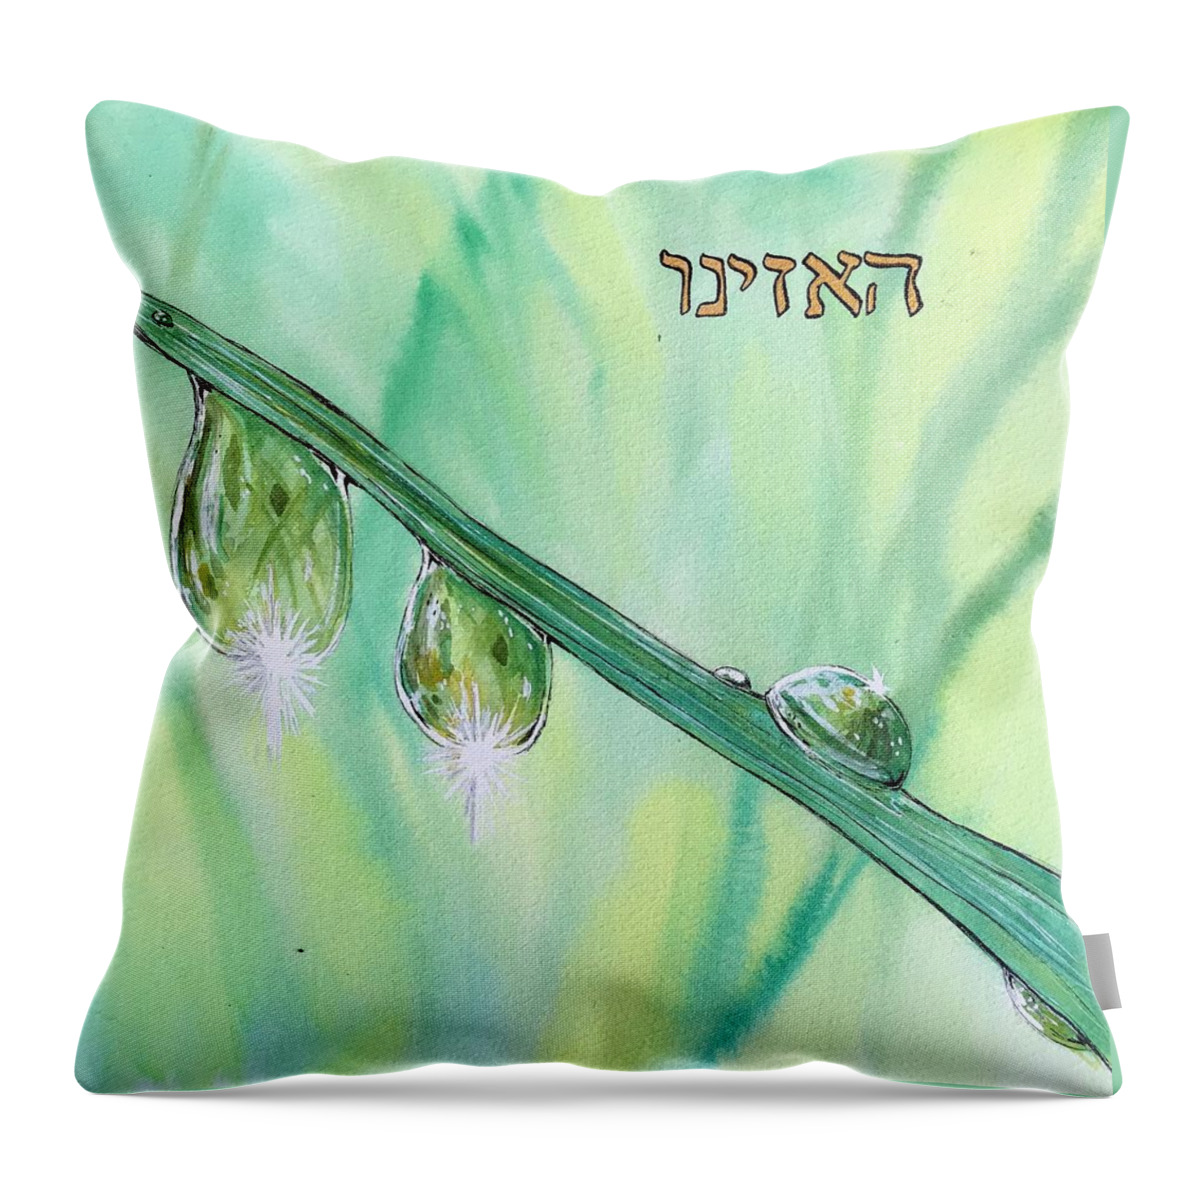 Haazinu Throw Pillow featuring the painting Haazinu by Starr Weems